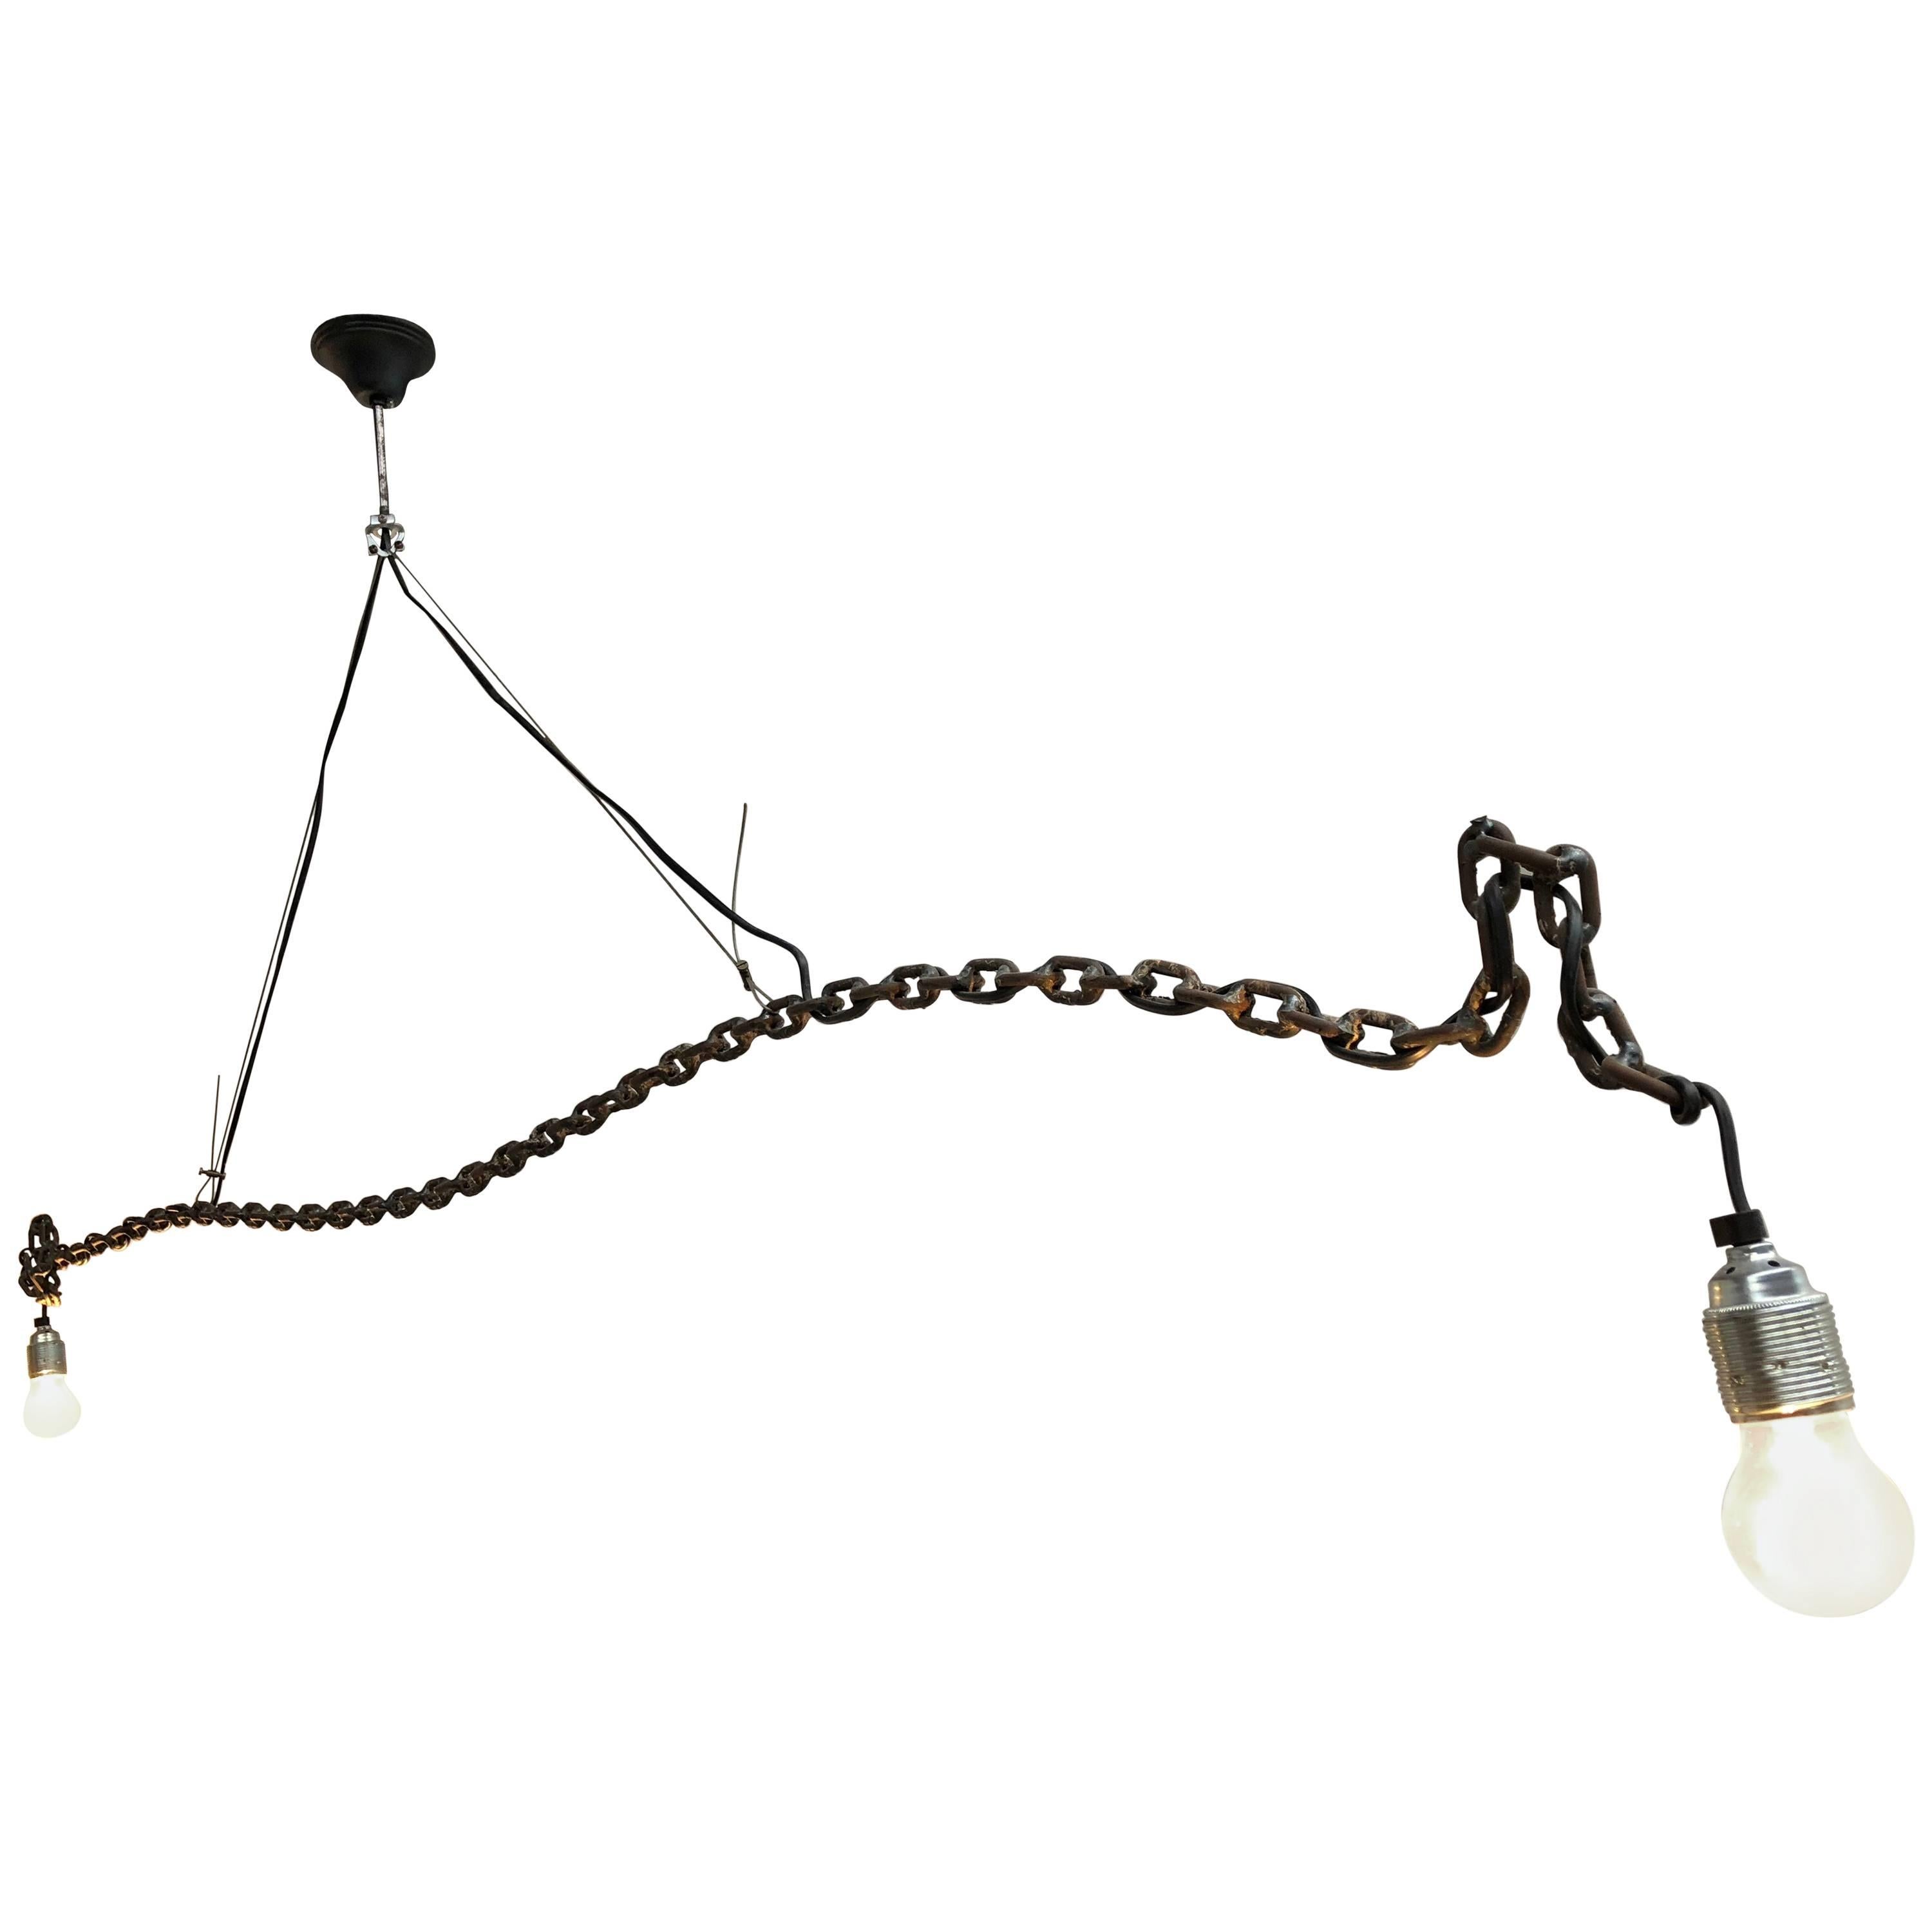 Early Edition of the Franz West 'Chain' Lighting Fixture Metamemphis, 1991